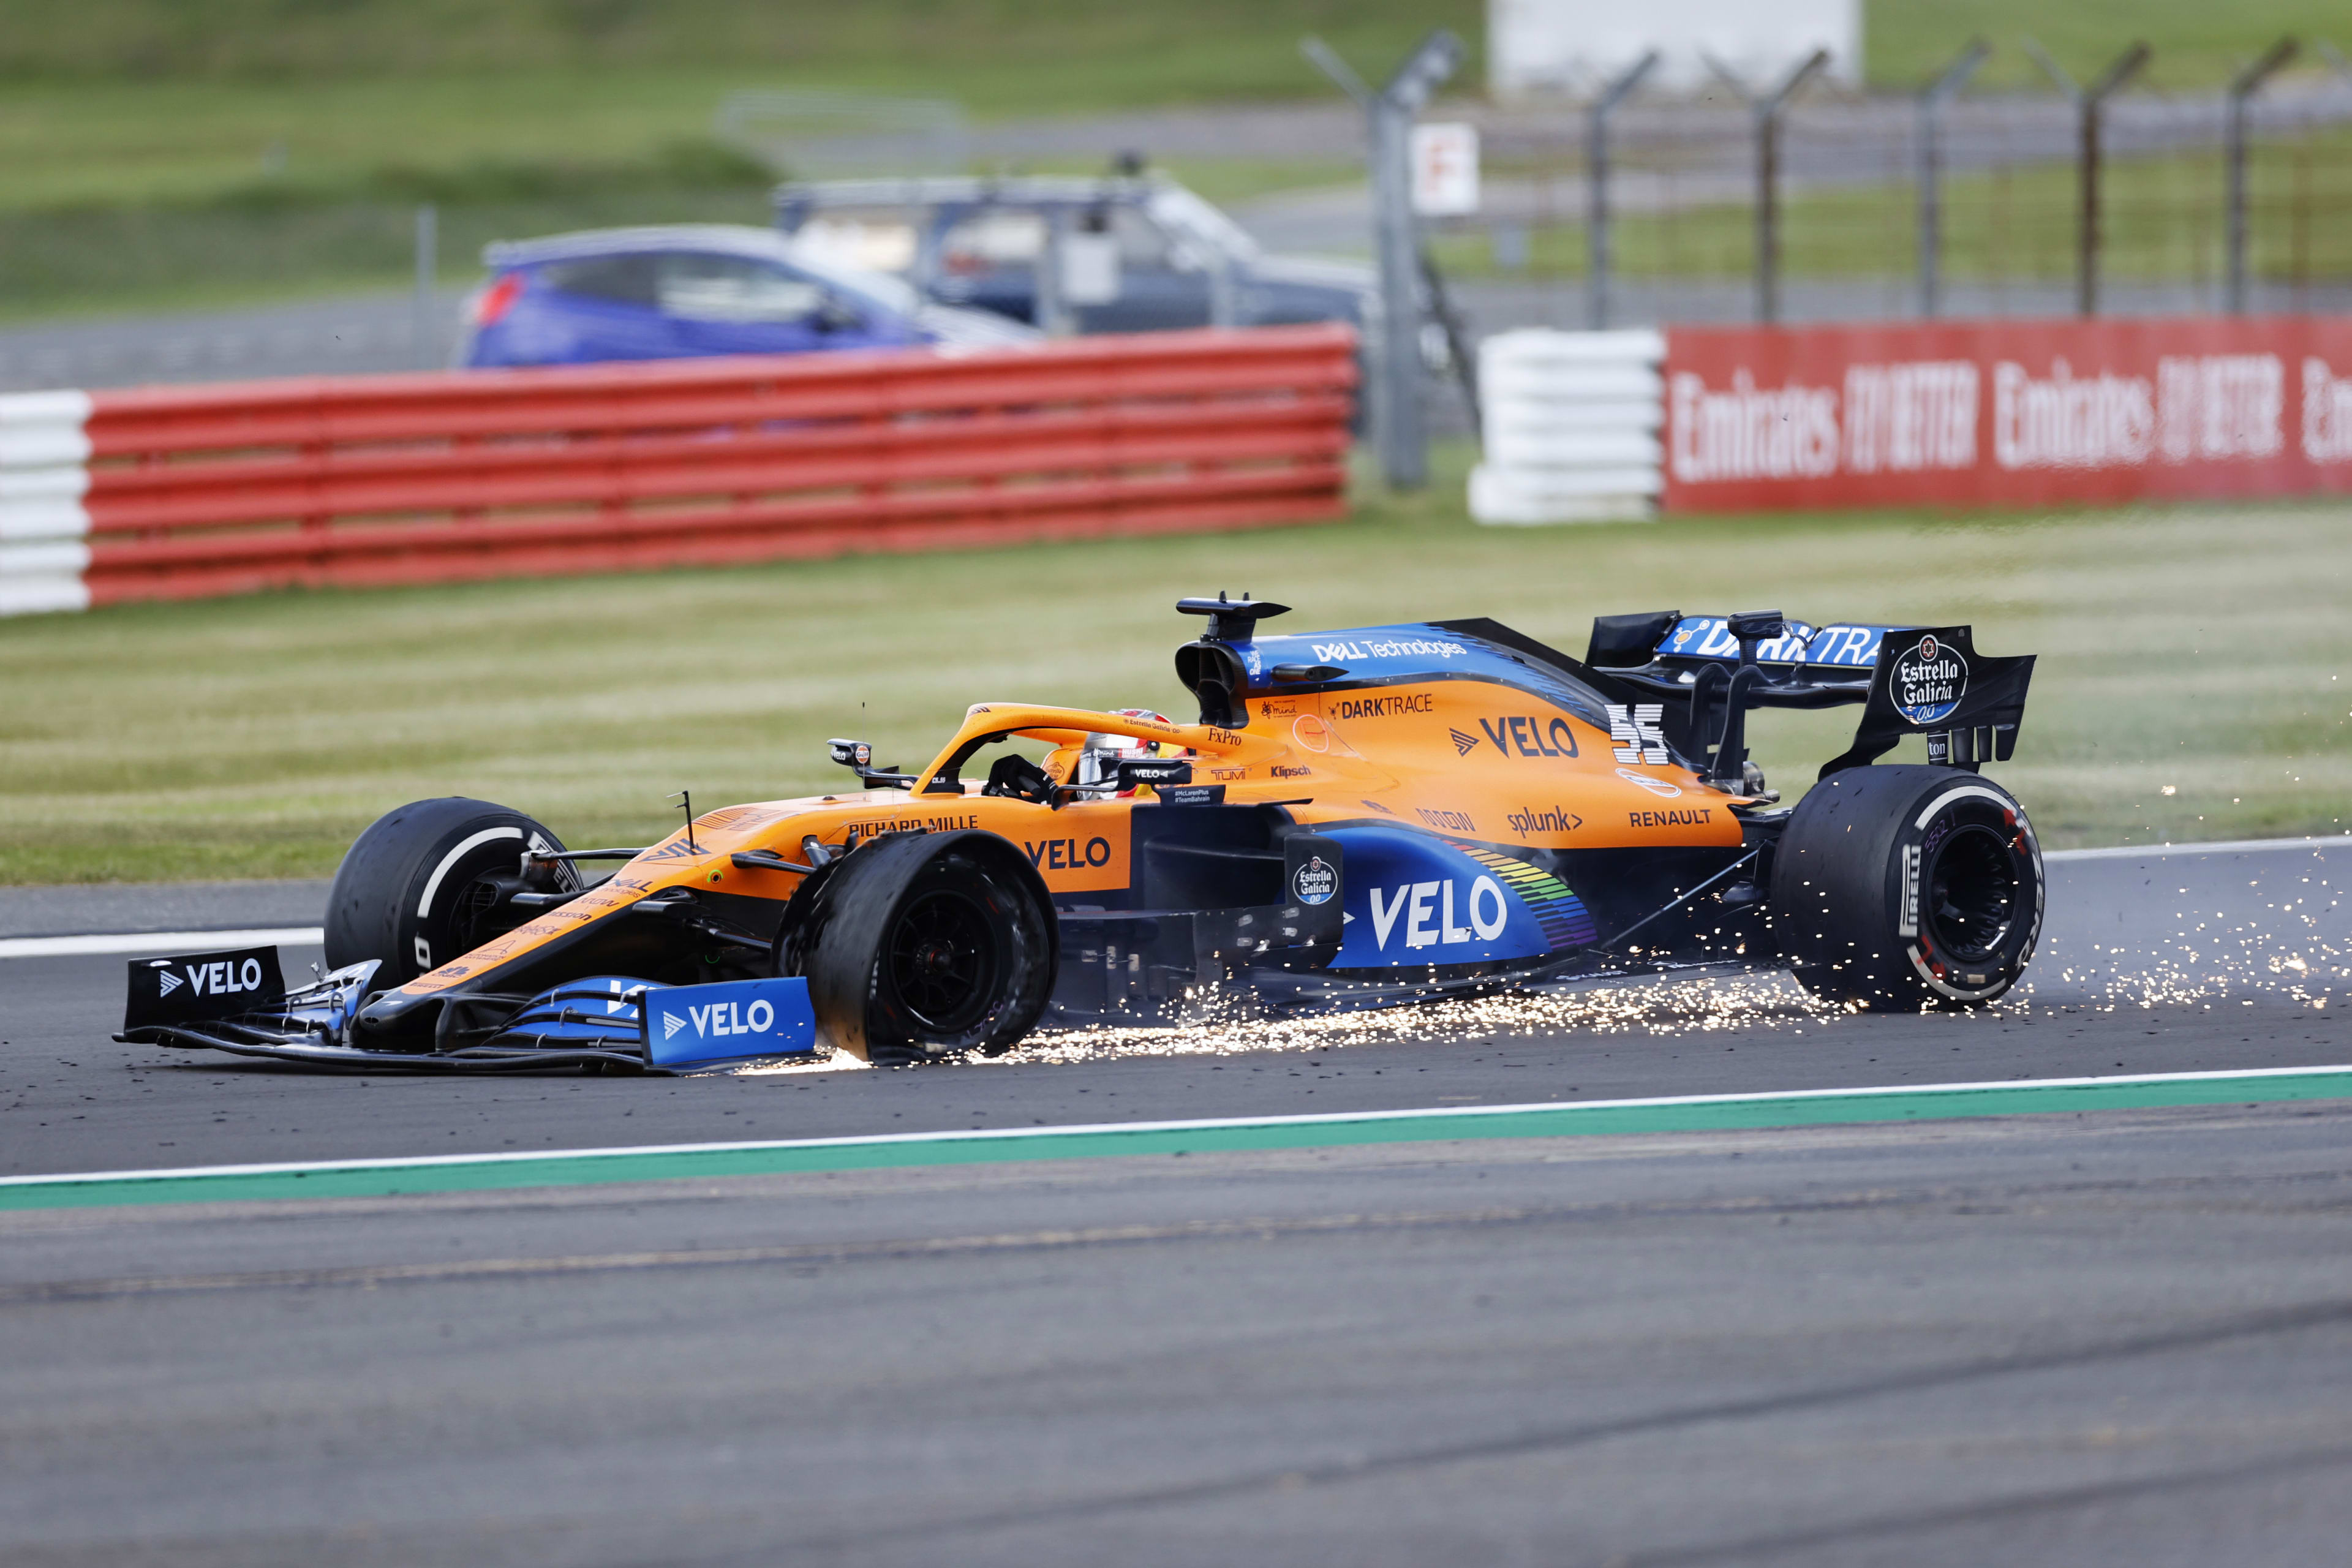 Luck hasnt been with me says Carlos Sainz after last-gasp tyre drama robs him of points at Silverstone Formula 1®